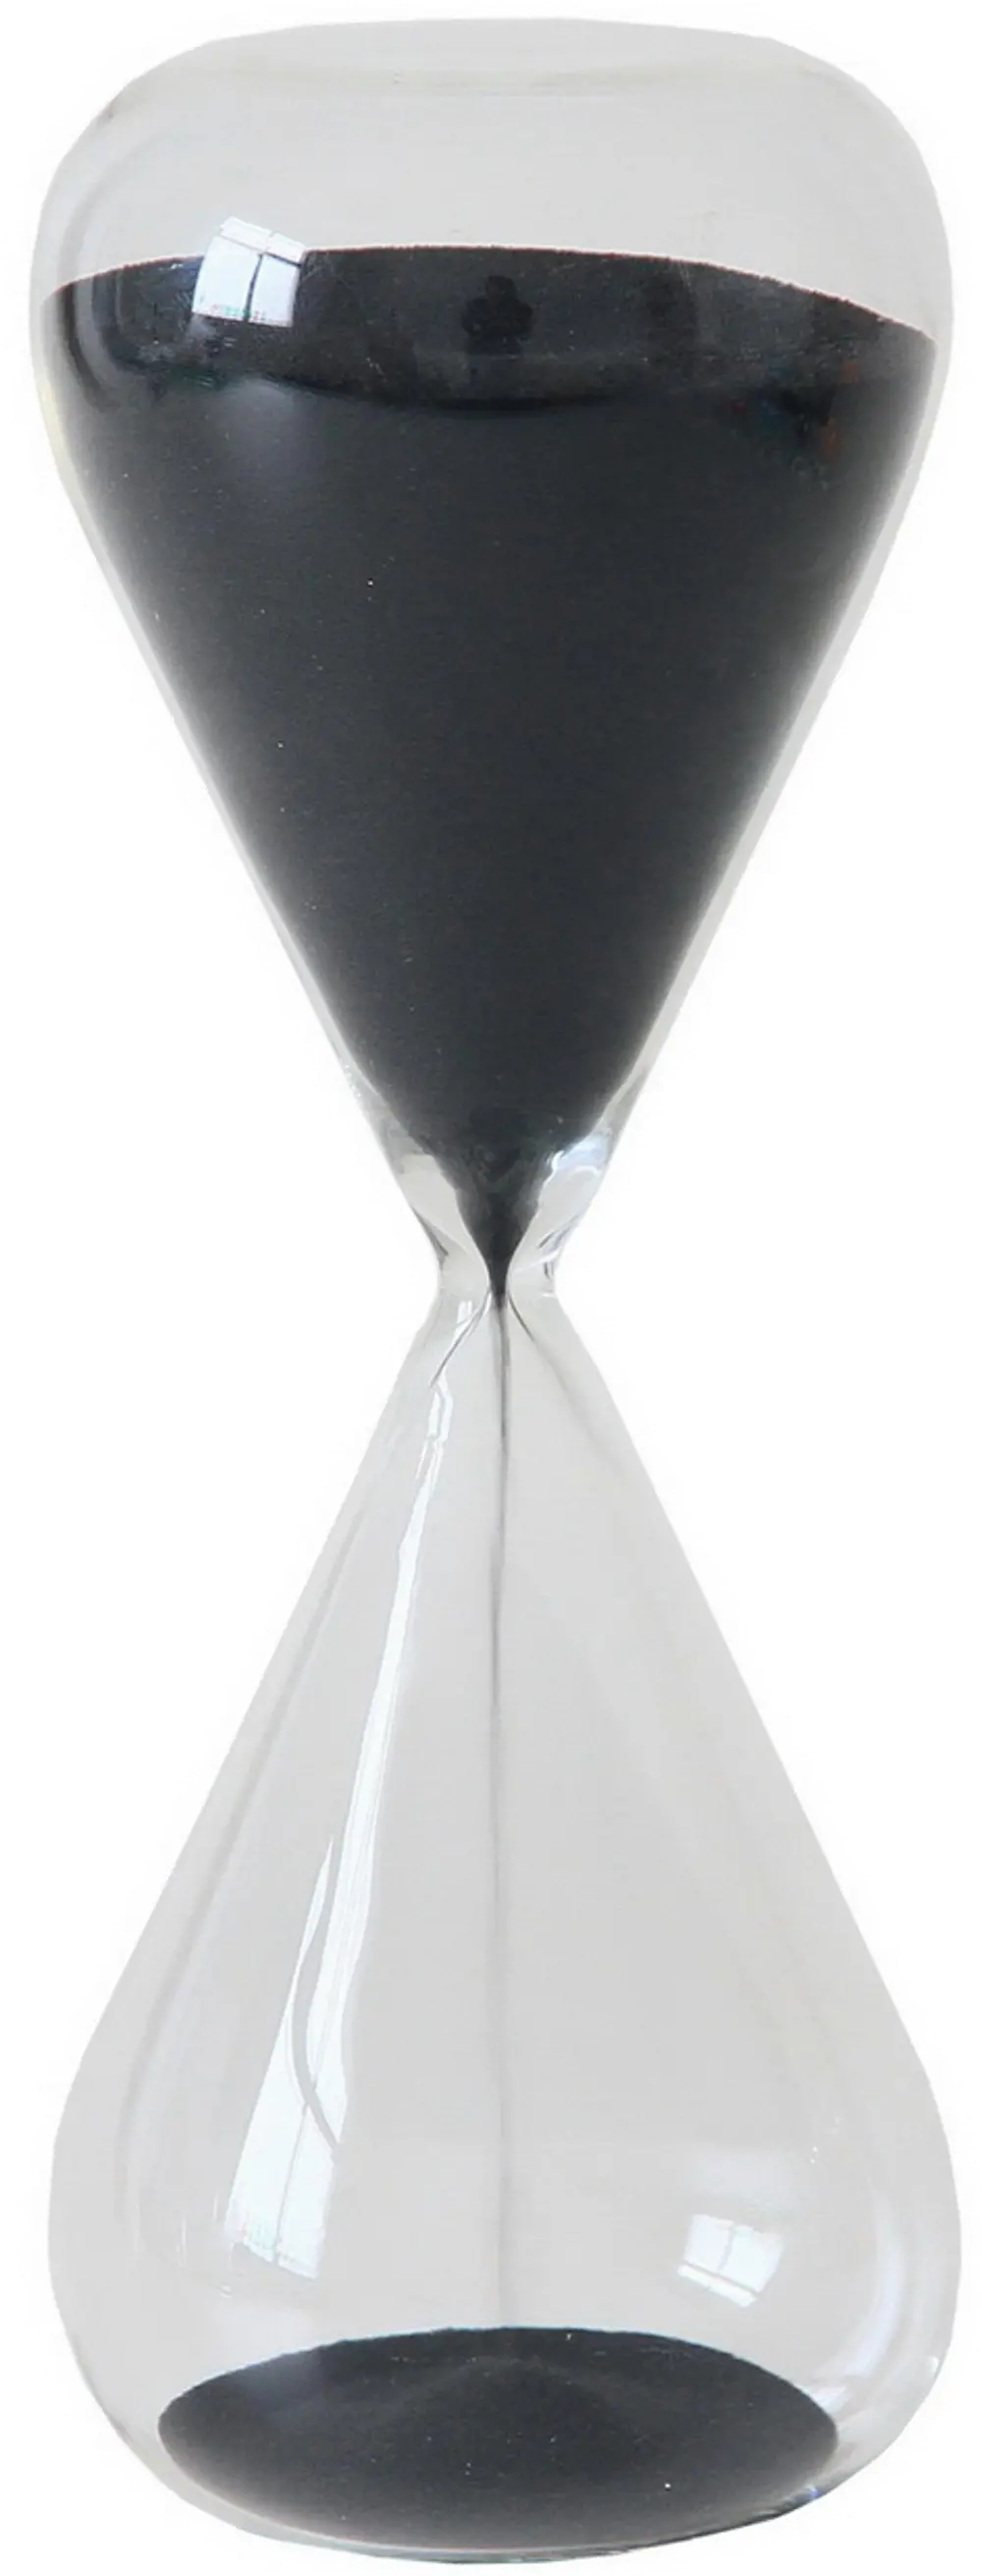 Hourglass and Black Sand 30 Minute Timer-1